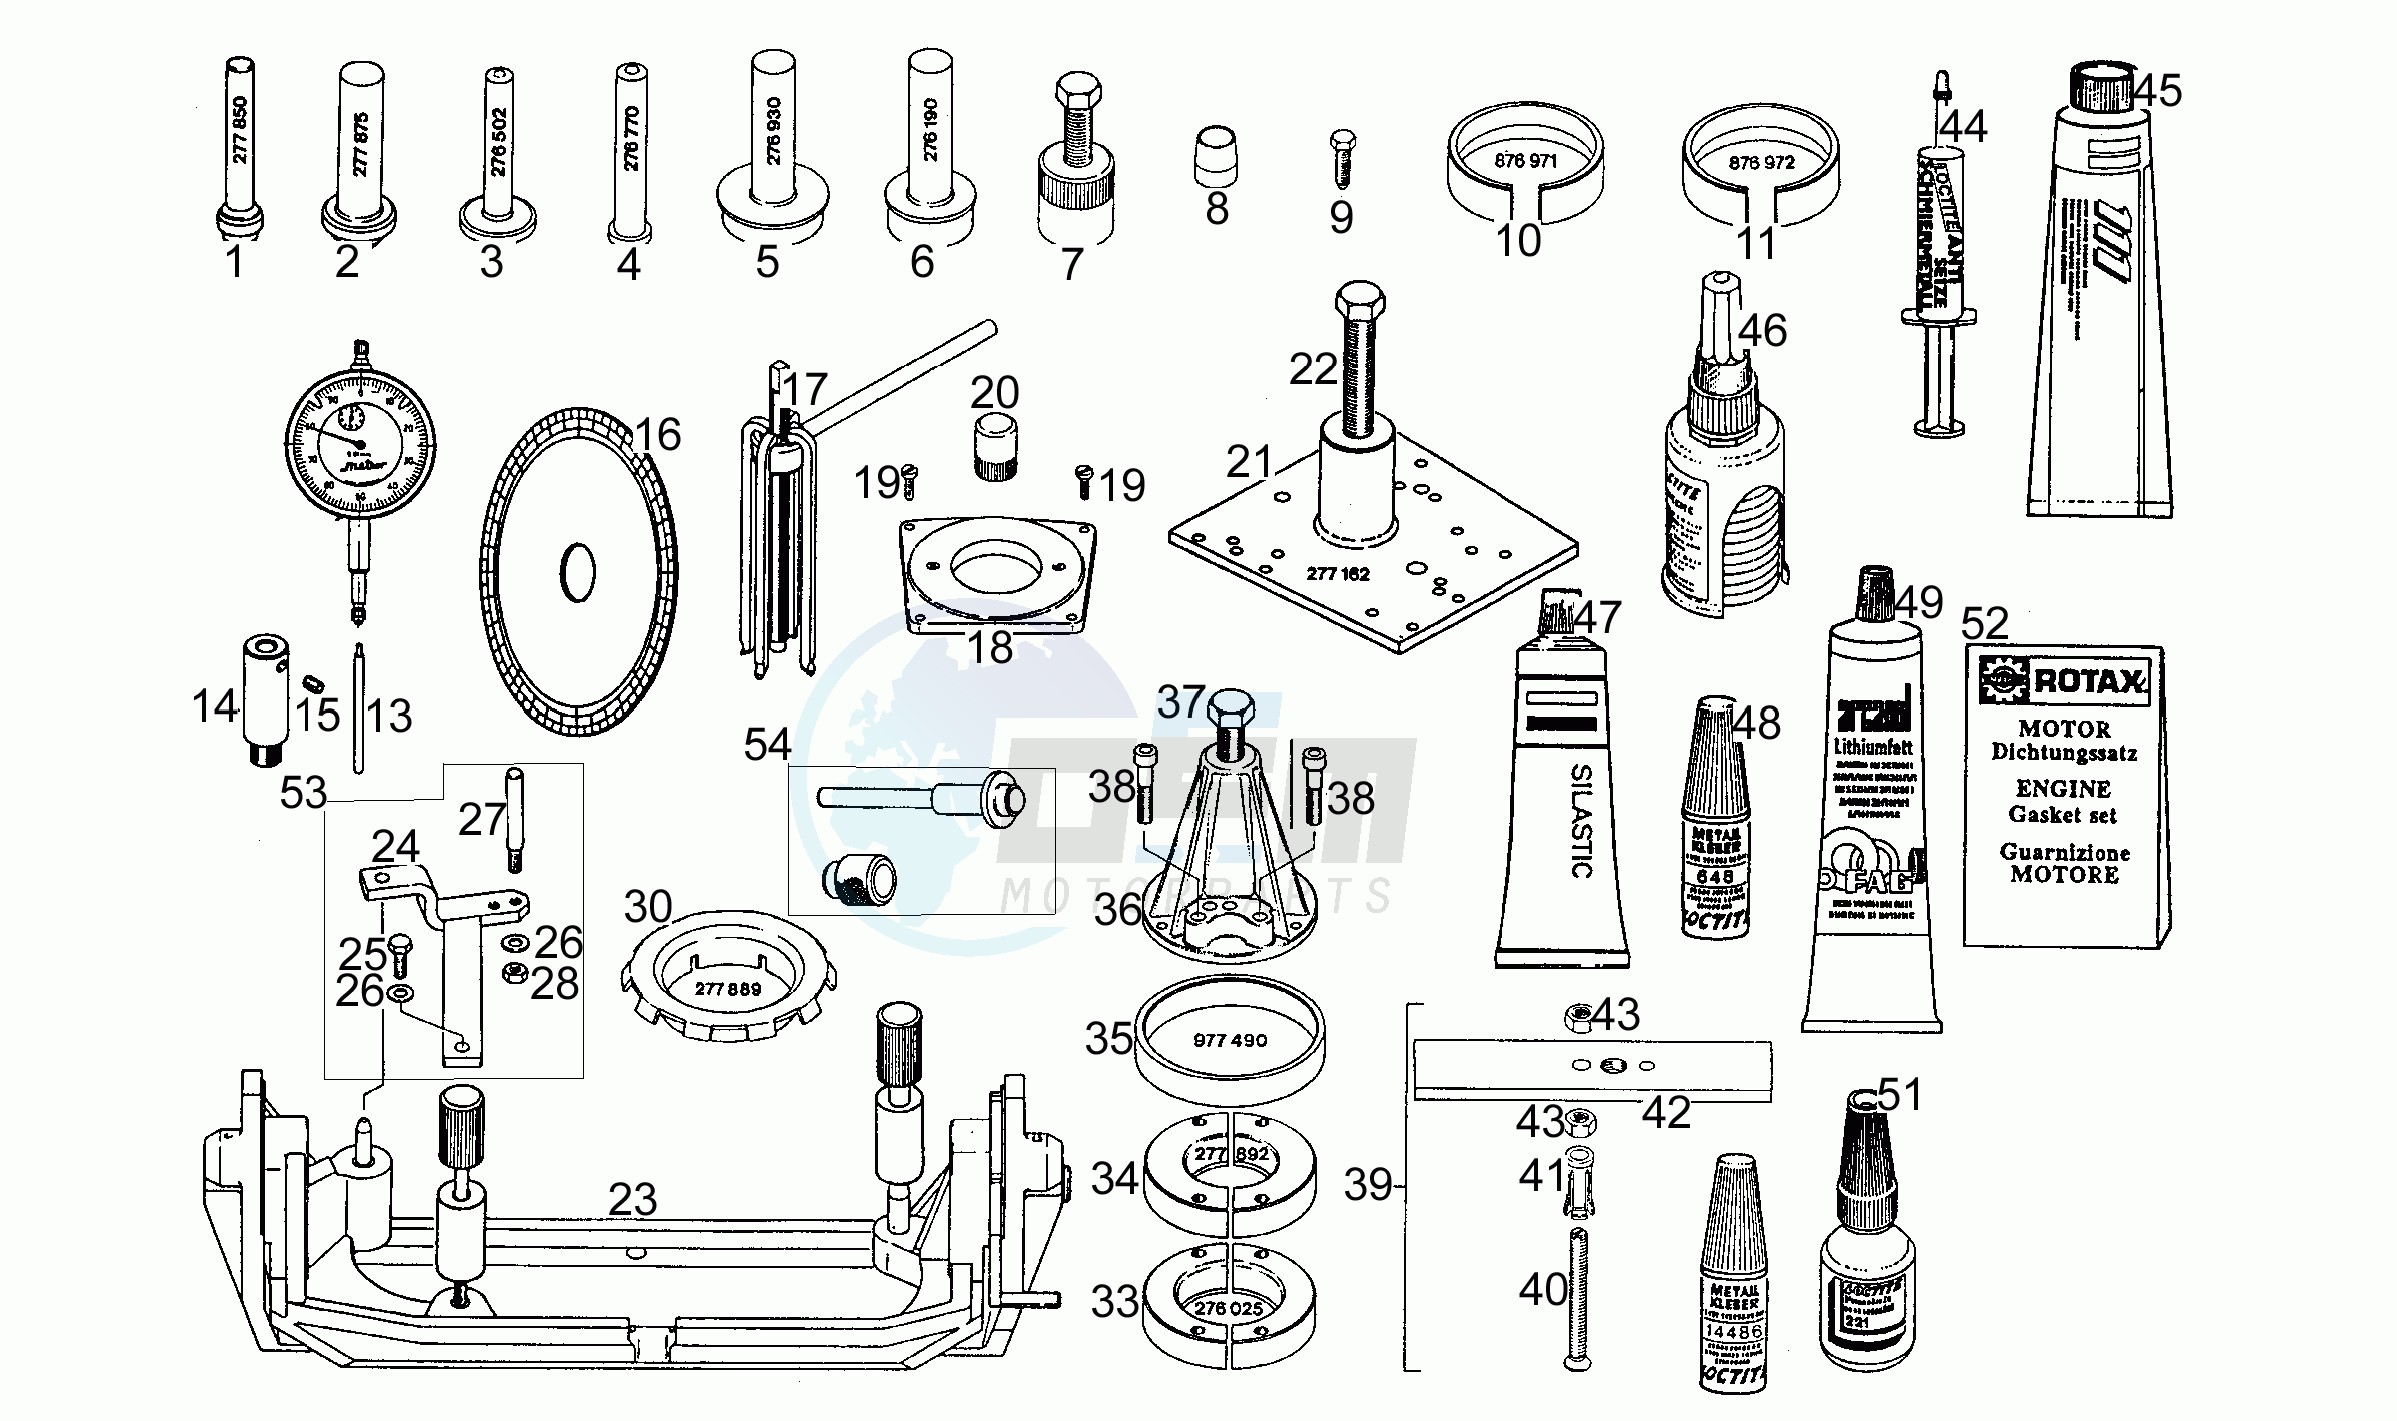 Special tools image